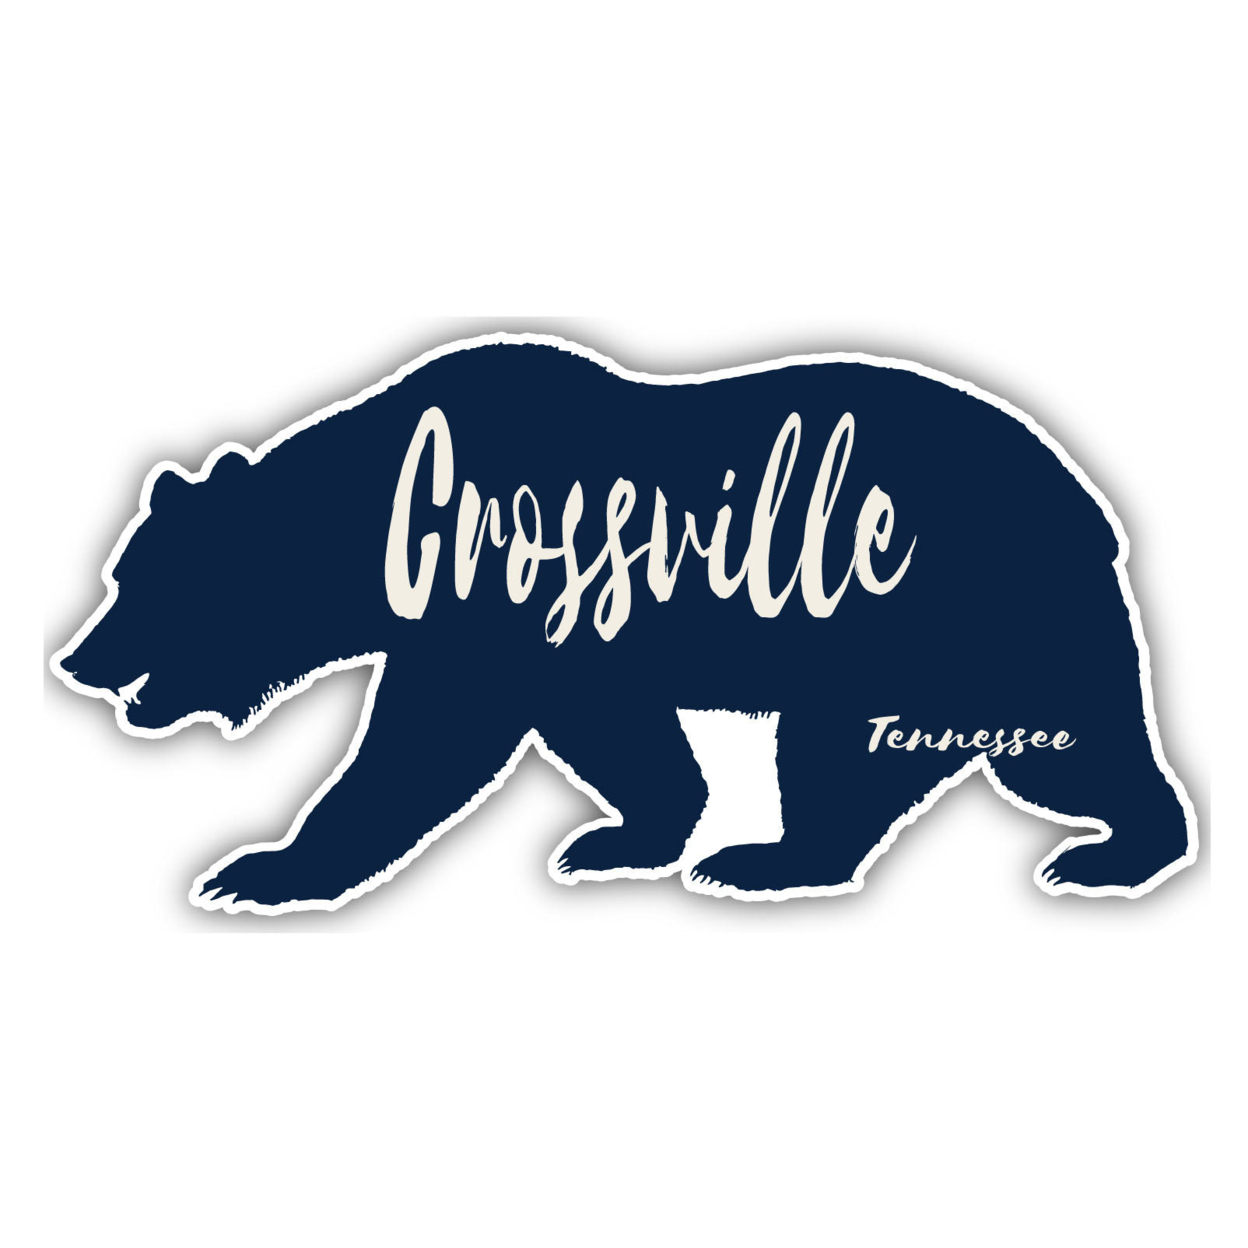 Crossville Tennessee Souvenir Decorative Stickers (Choose Theme And Size) - 4-Pack, 4-Inch, Tent